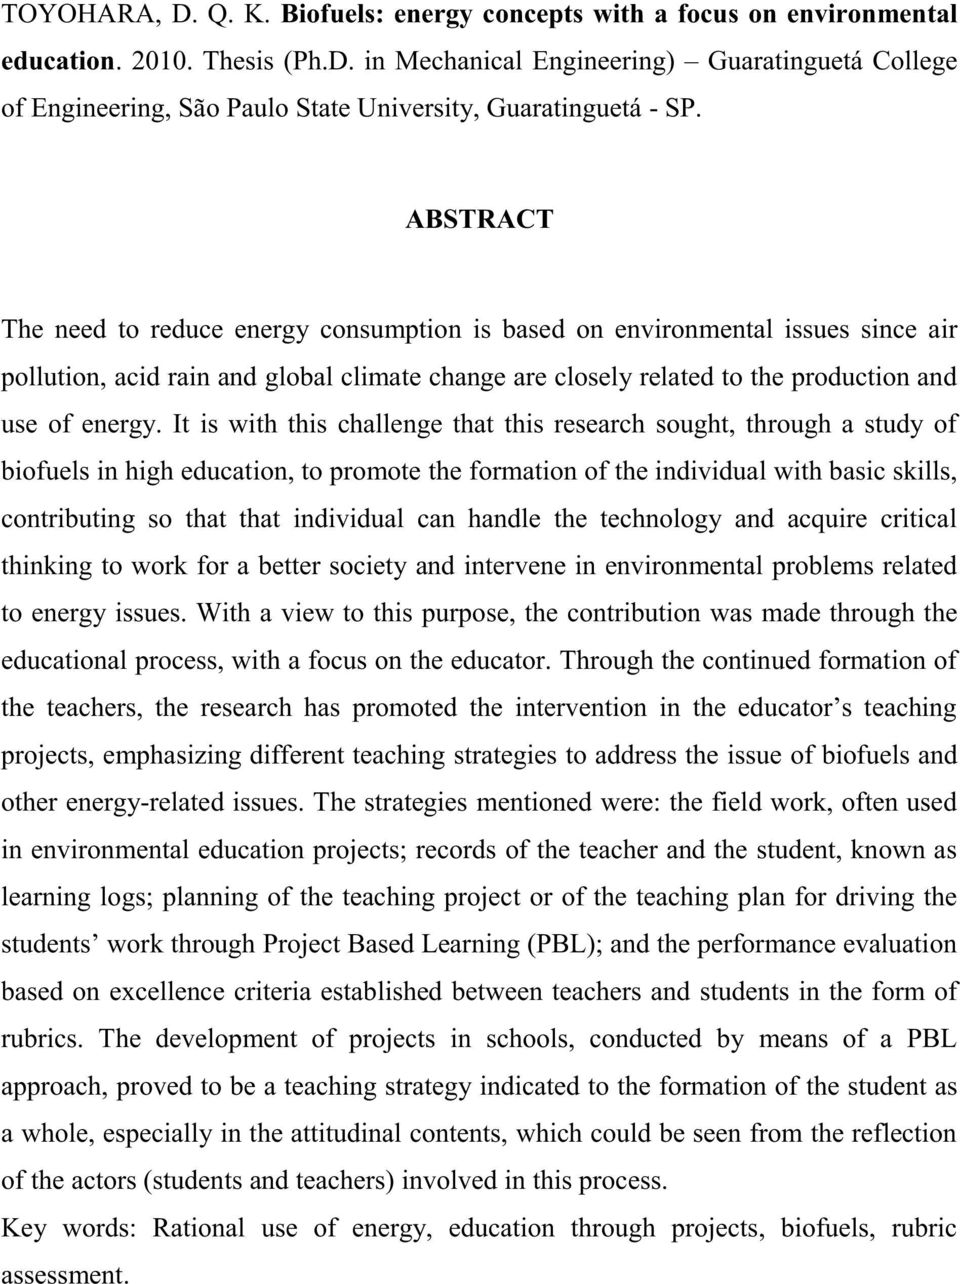 It is with this challenge that this research sought, through a study of biofuels in high education, to promote the formation of the individual with basic skills, contributing so that that individual